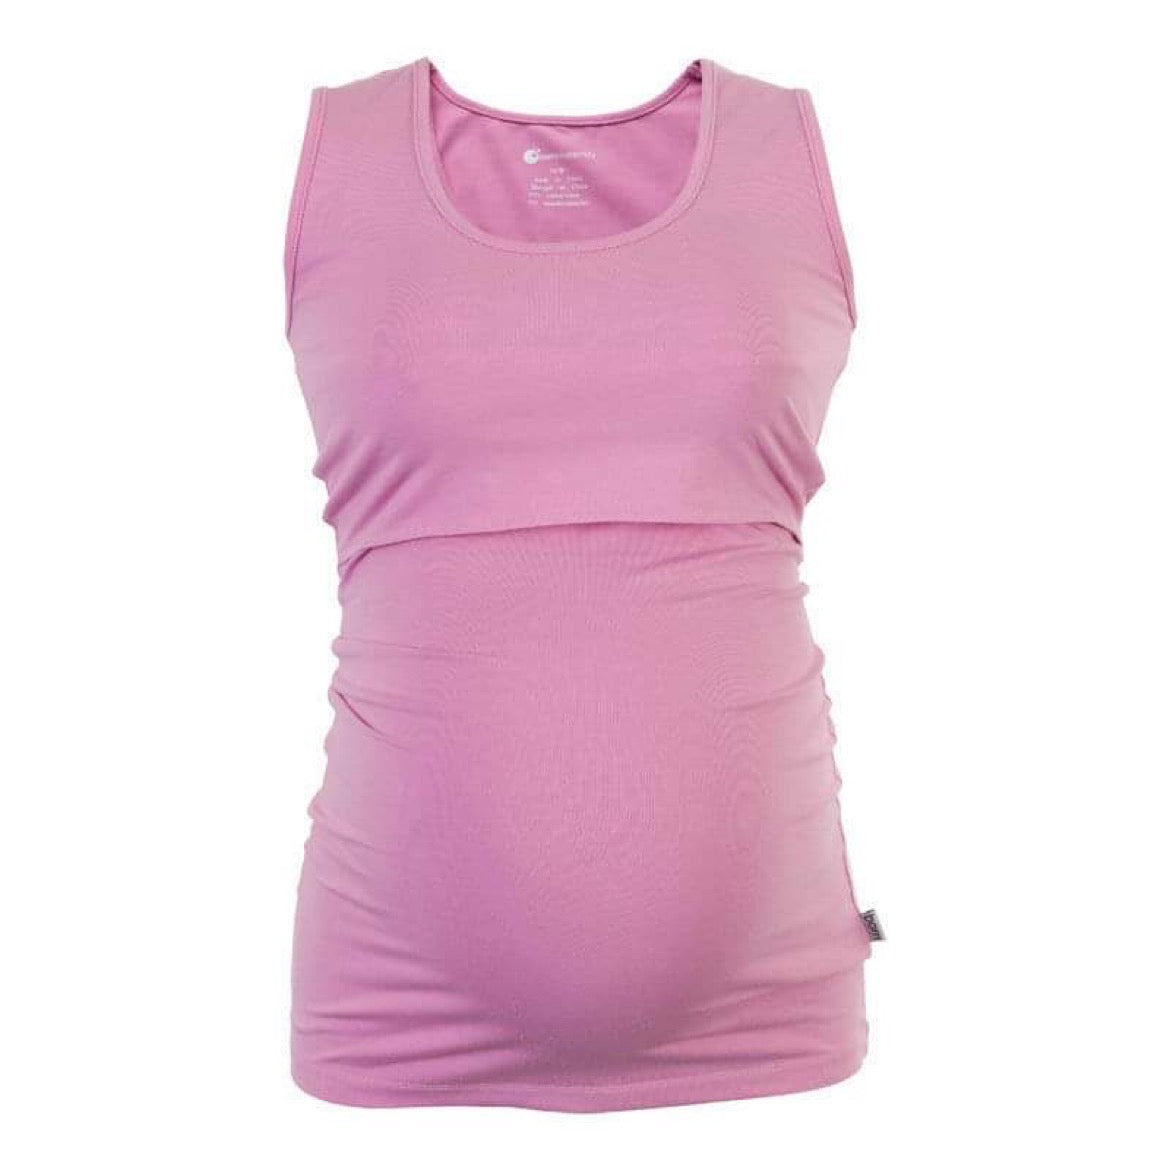 Born Maternity Casual Comfy Affordable Quality Feeding Singlet Top Pink